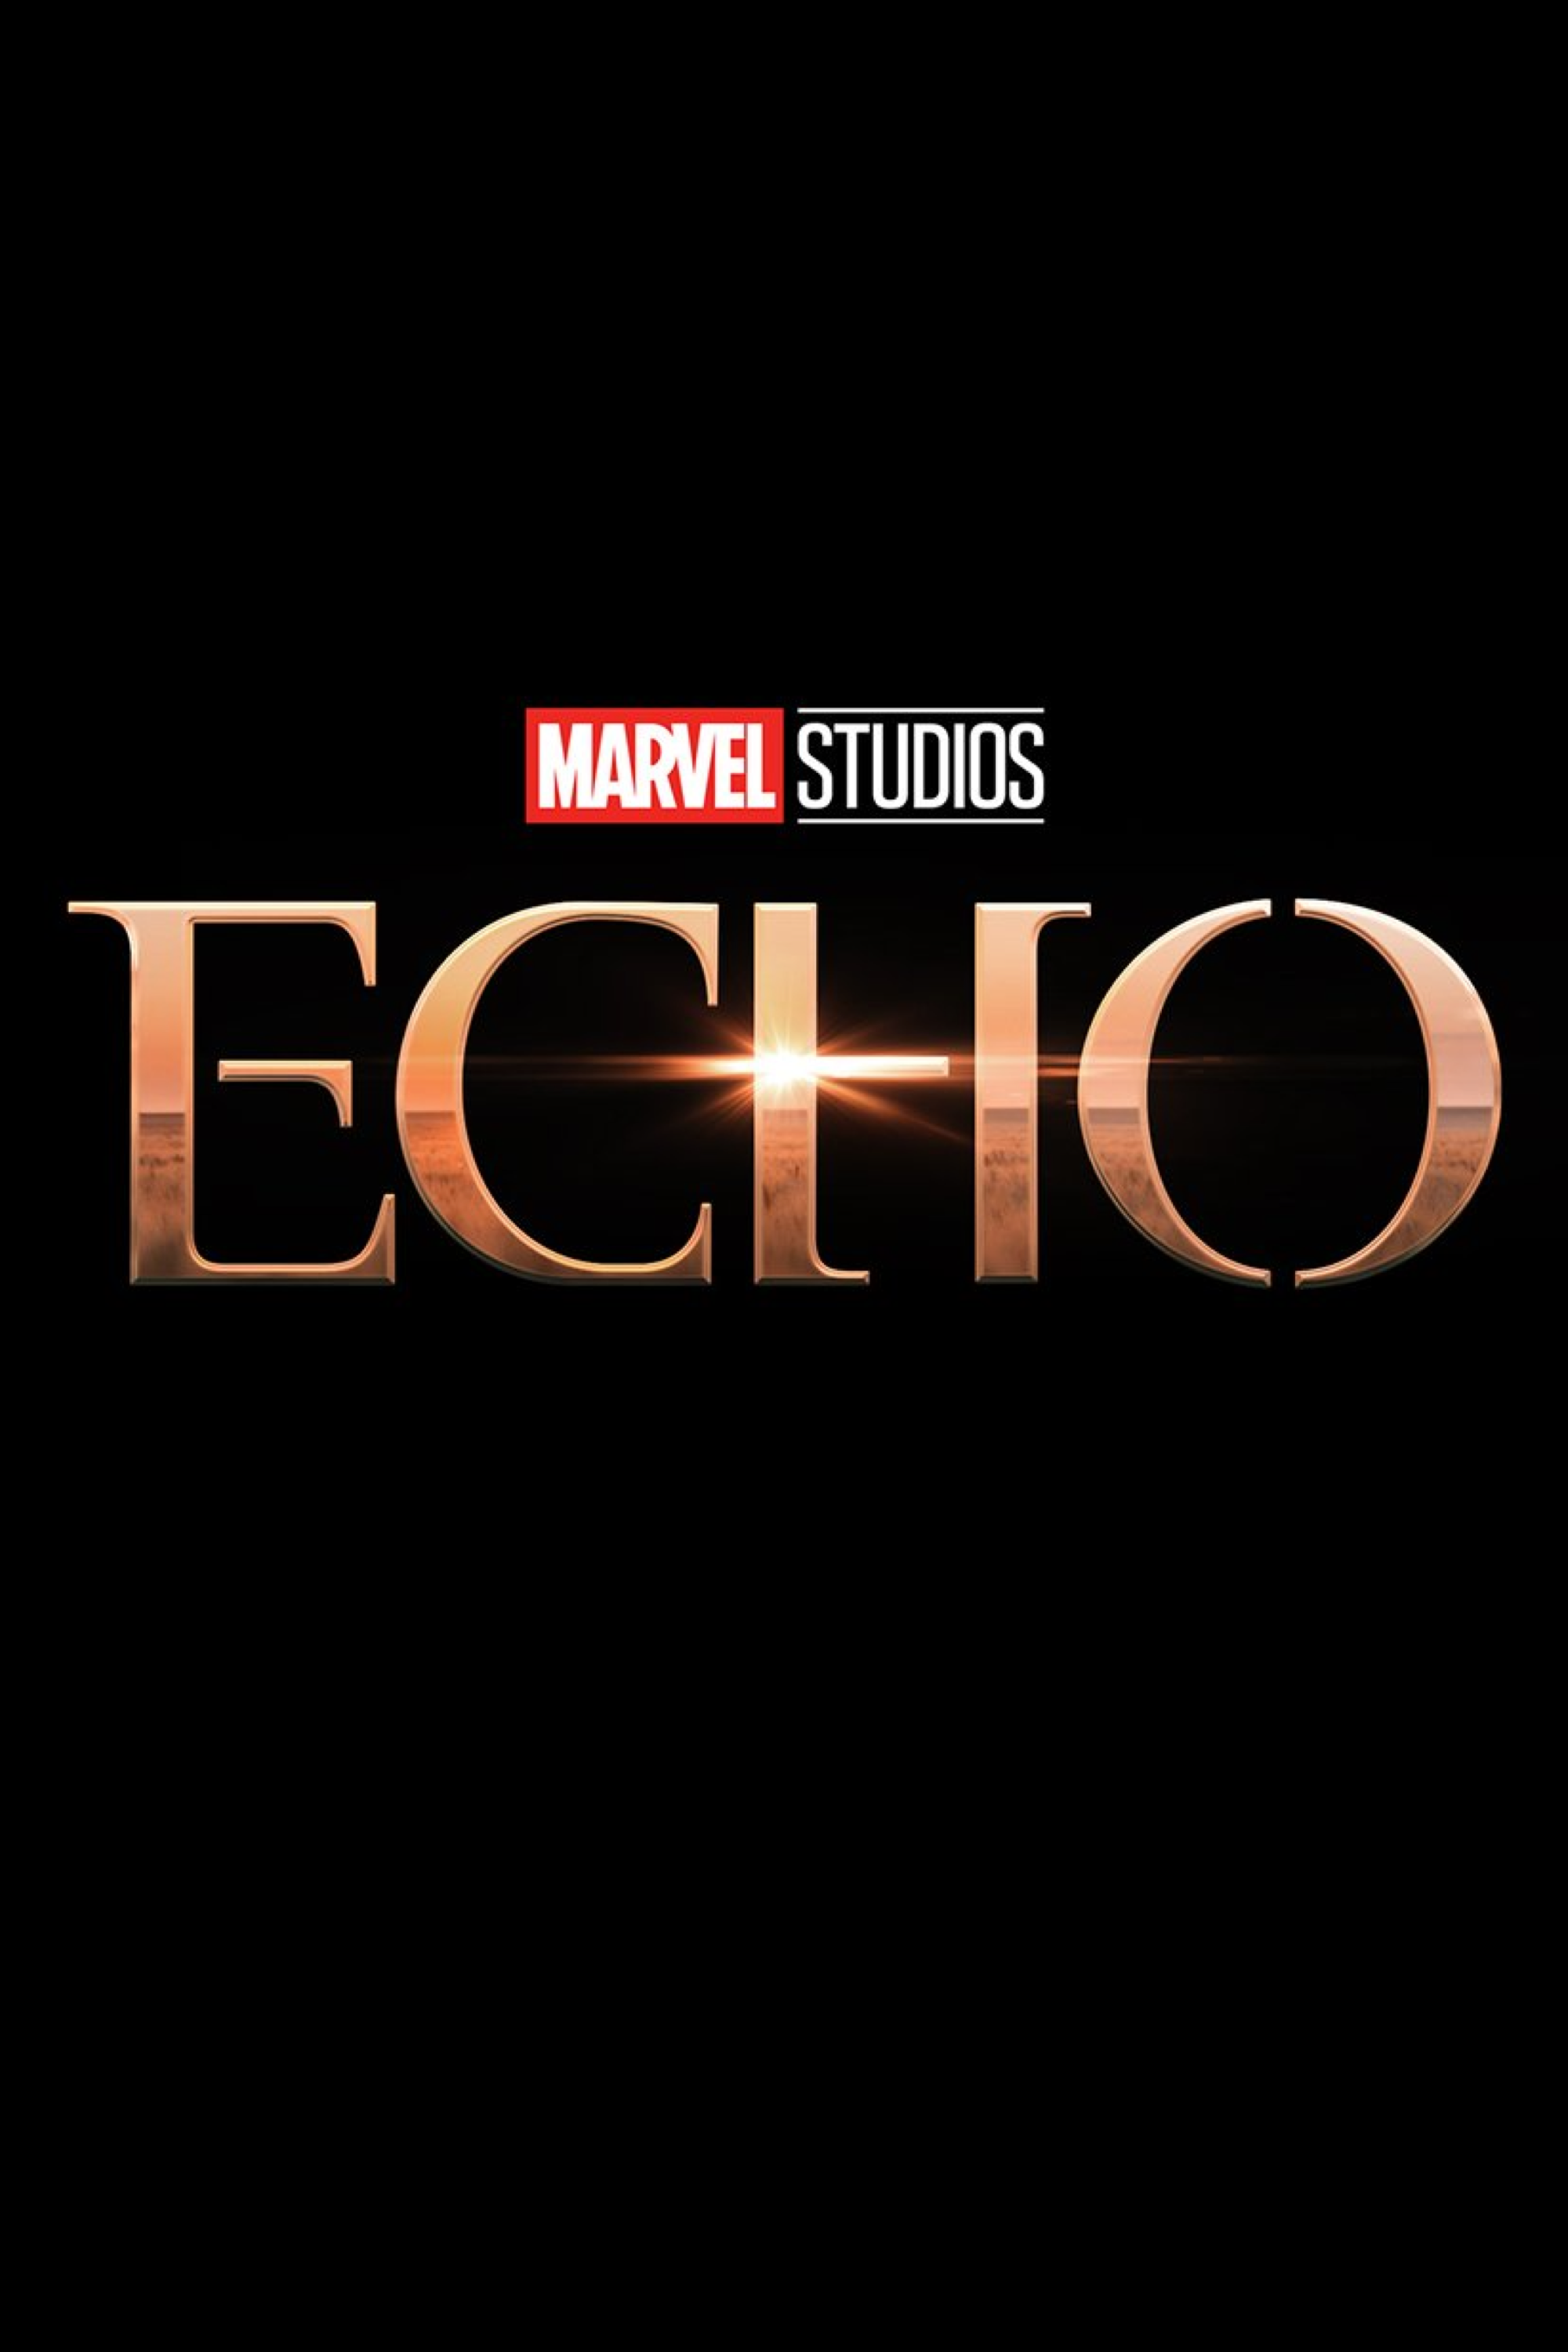 5 Things The Echo Finale Sets Up For The MCU Going Forward